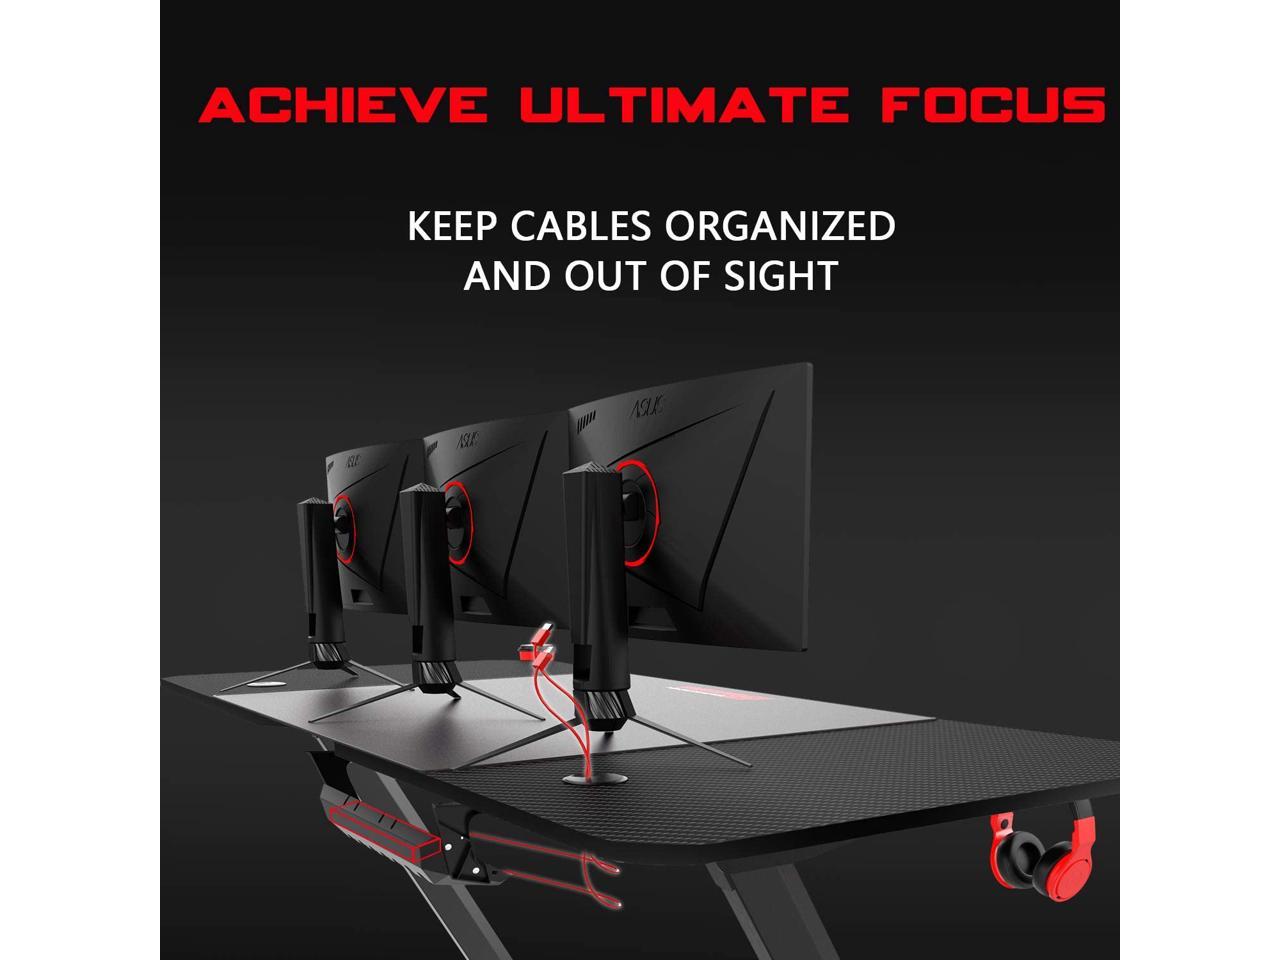 BOSSIN 63 Inch Ergonomic Gaming Desk, Z-Shaped Office PC Computer Desk with Large Mouse Pad, Gamer Tables Pro with USB Gaming Handle Rack, Stand Cup Holder&Headphone Hook inch, Black) - Newegg.com